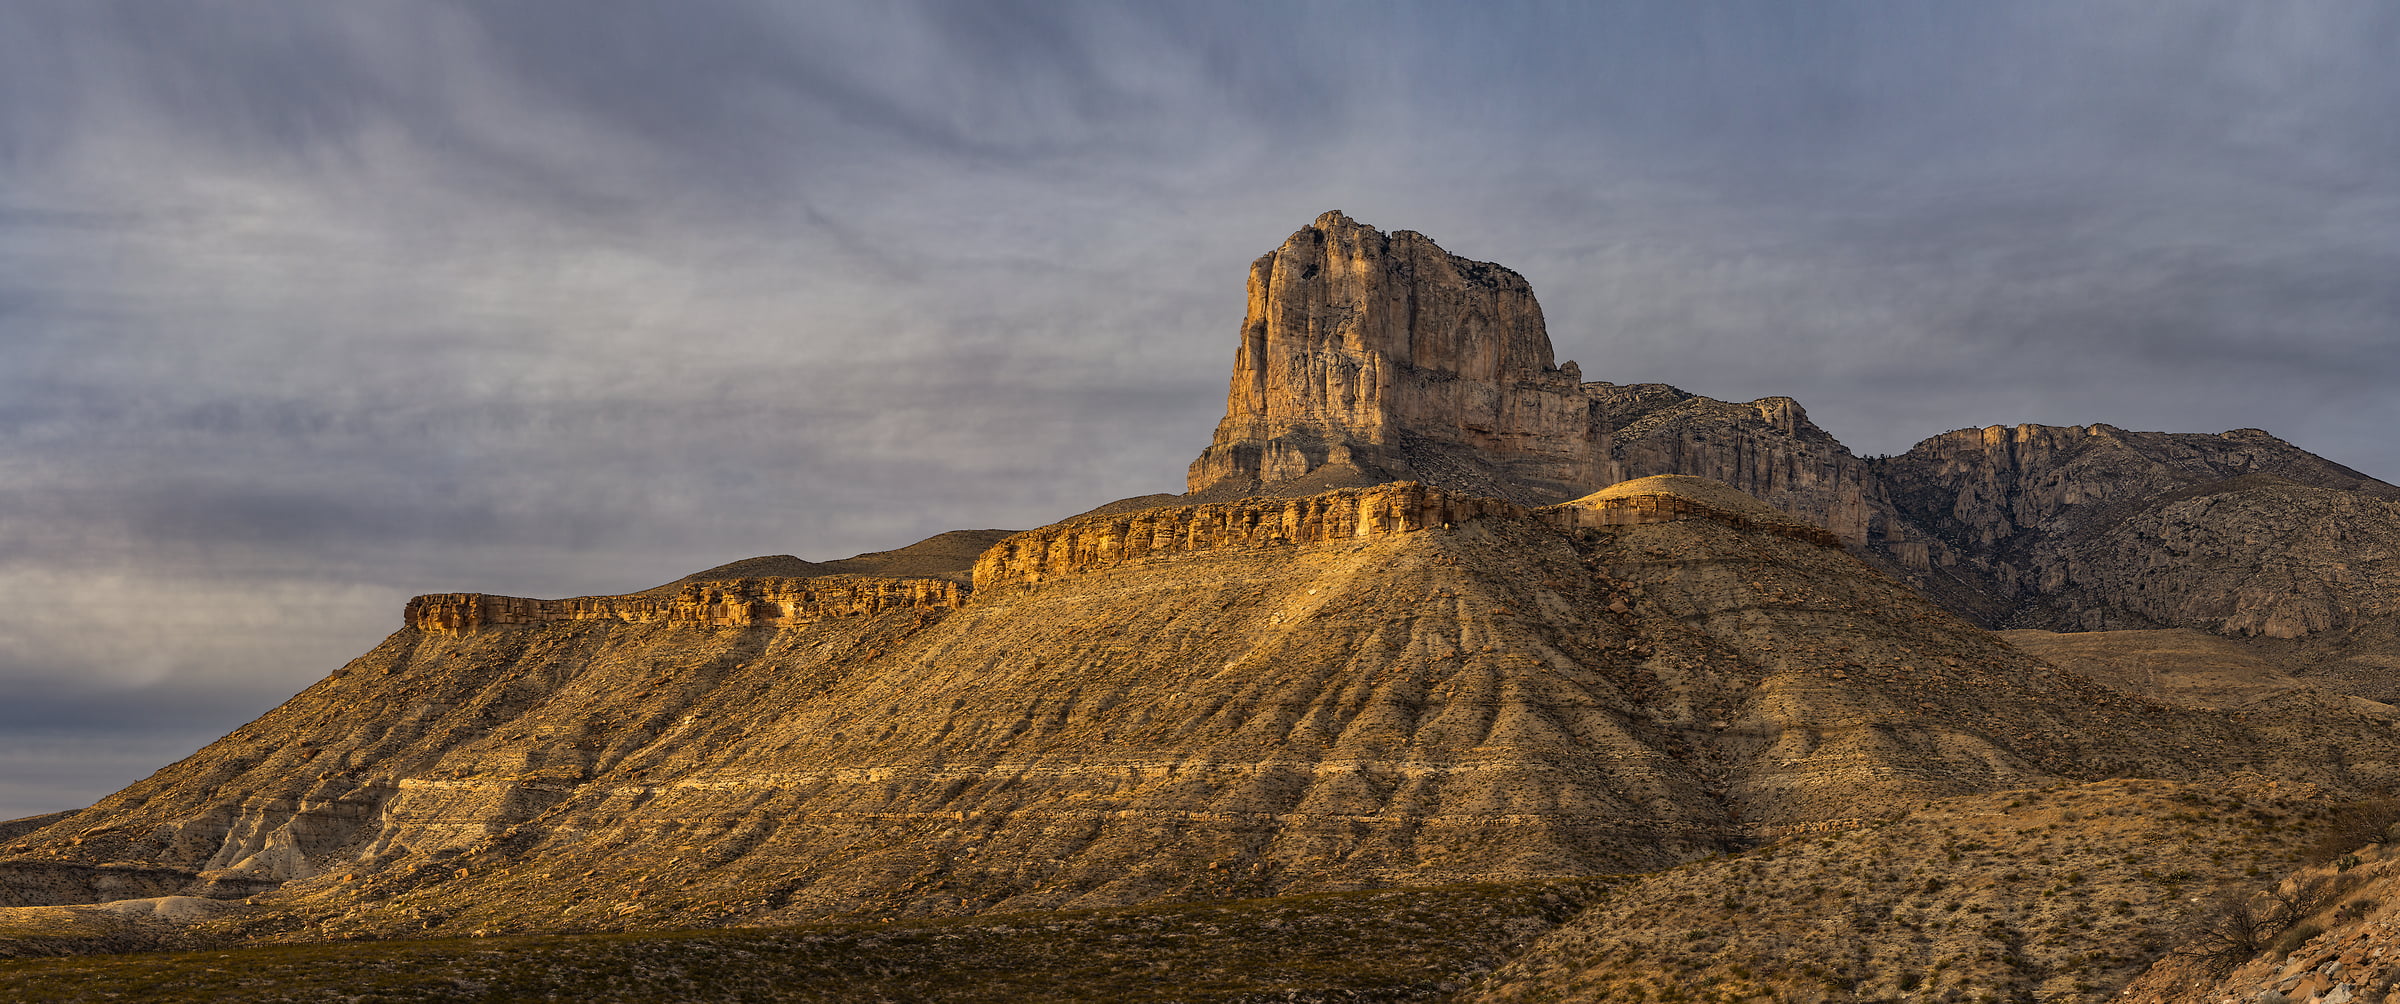 582 megapixels! A very high resolution, large-format VAST photo print of El Capitan in Guadalupe Mountains National Park; landscape photograph created by Chris Blake.